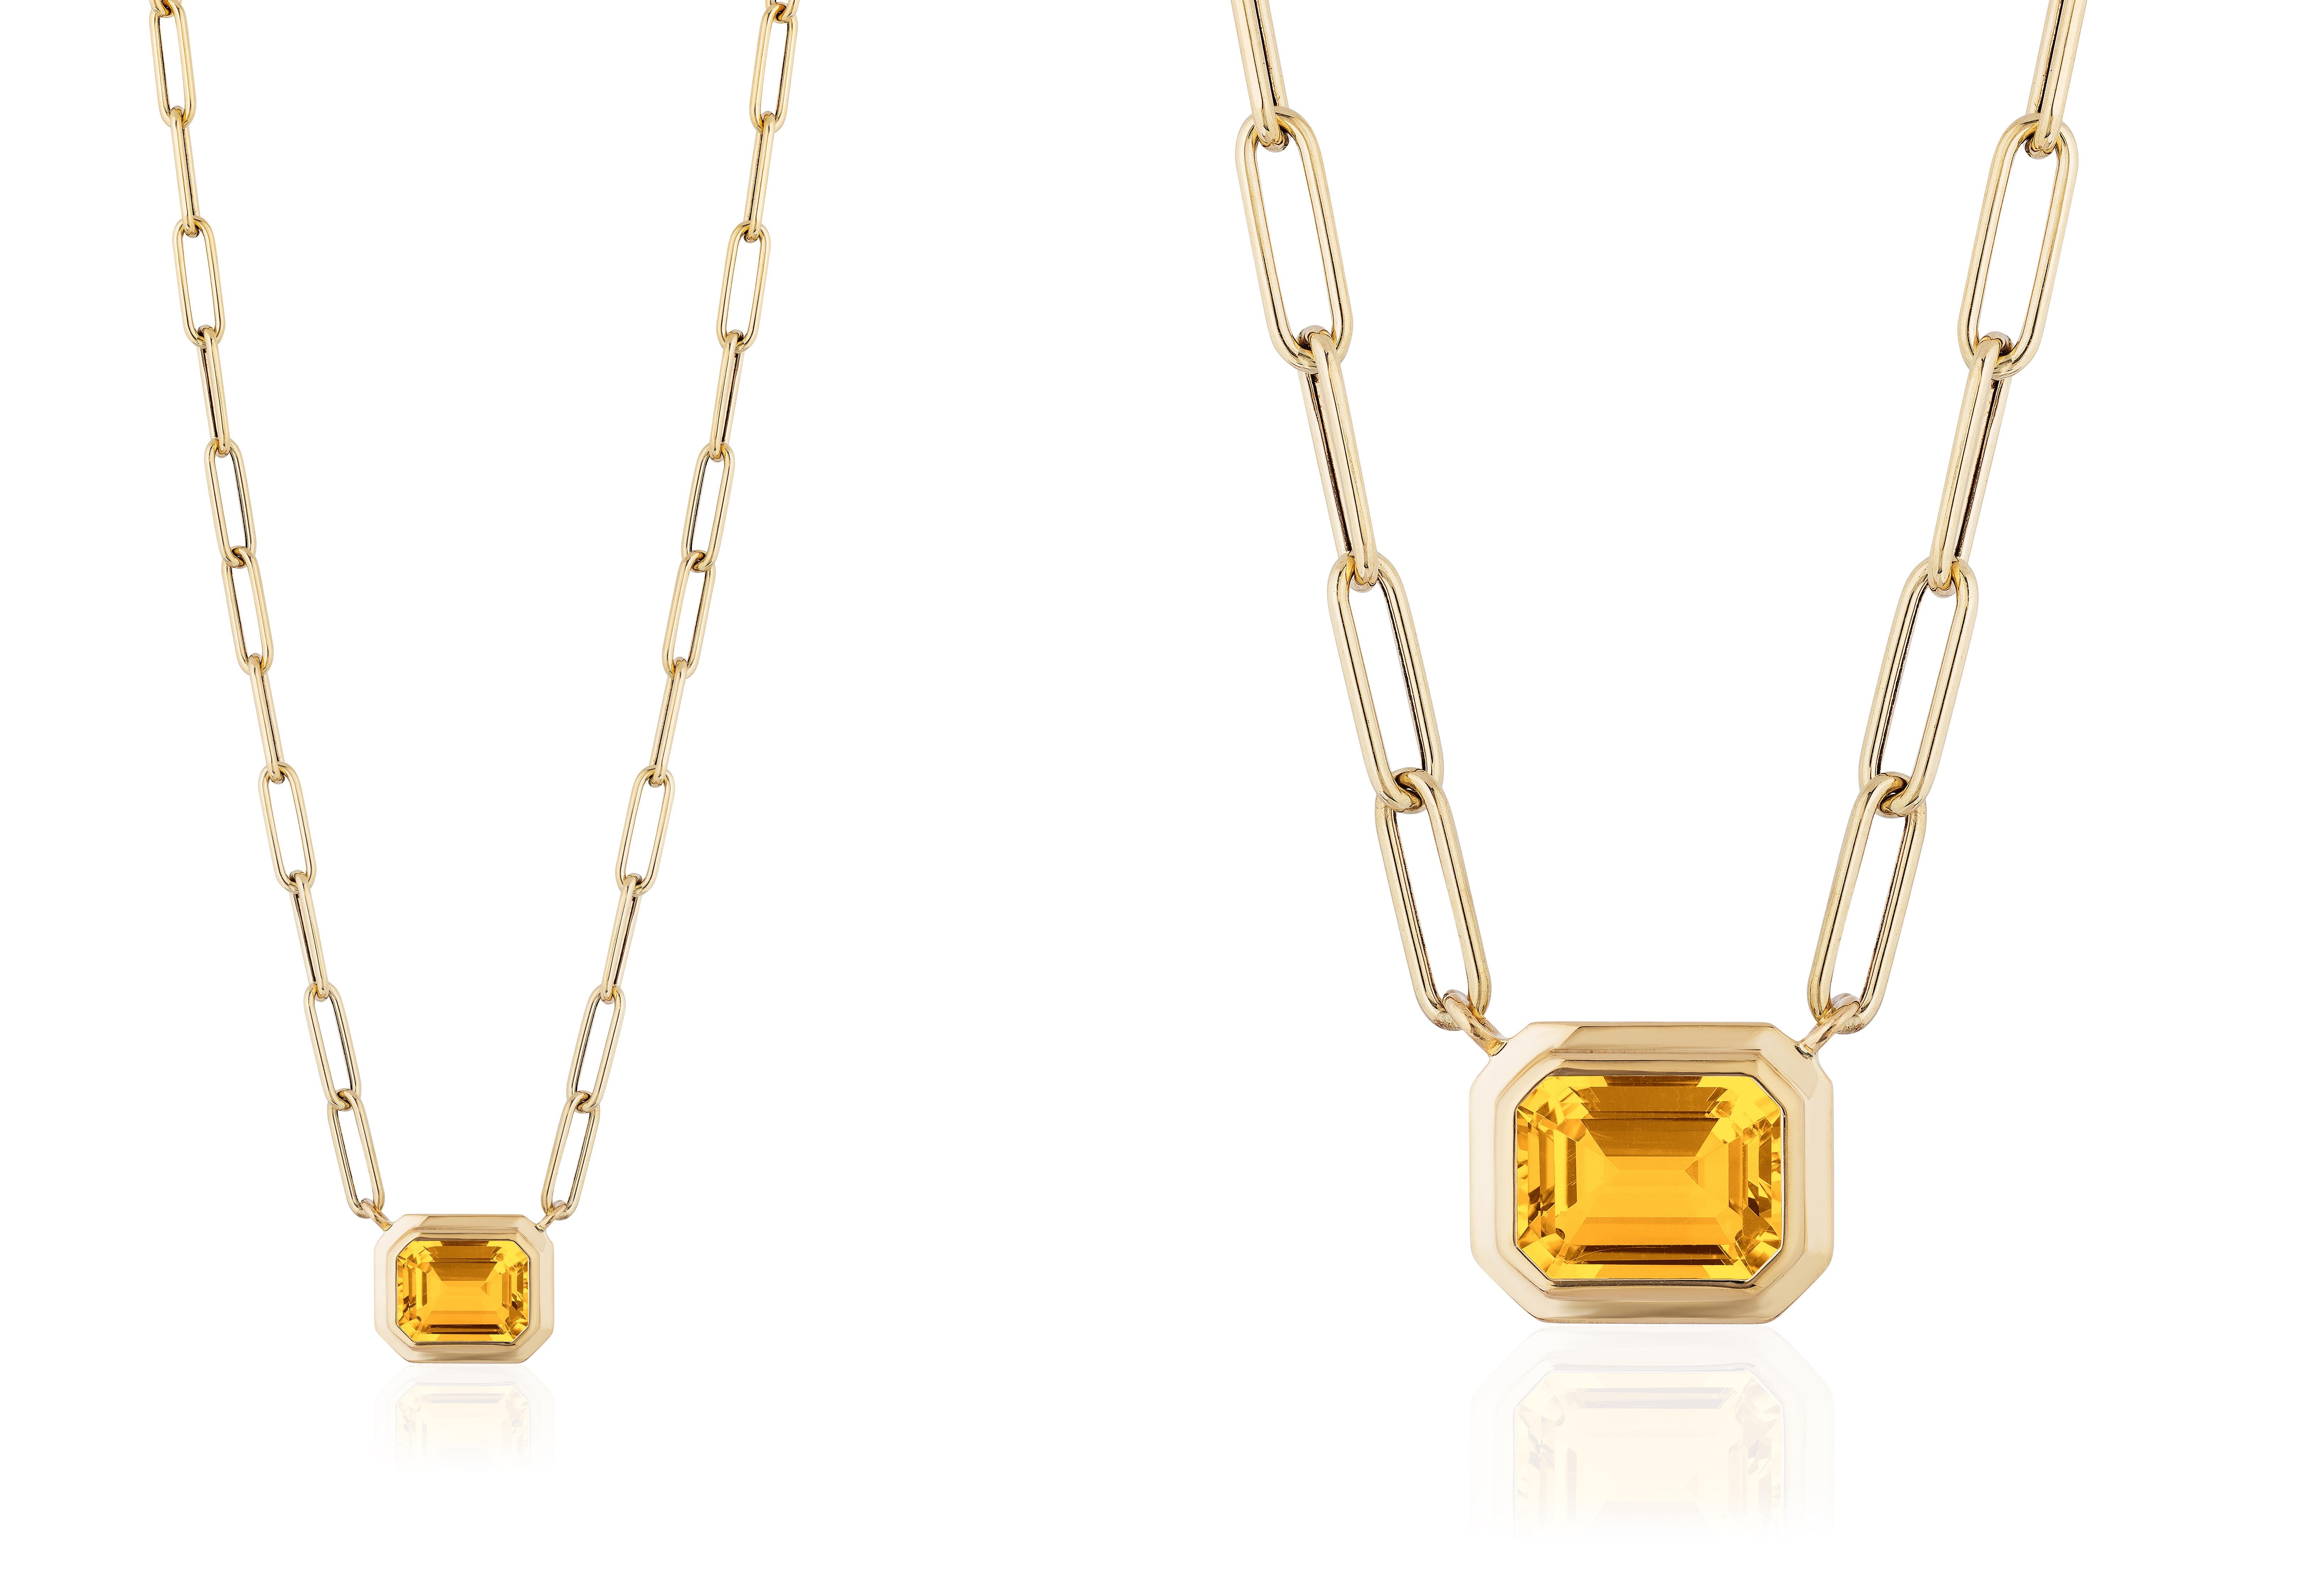 This beautiful East-West Citrine Emerald Cut Bezel Set Pendant in 18K Yellow Gold is from our ‘Manhattan’ Collection. Minimalist lines yet bold structures are what our Manhattan Collection is all about. Our pieces represent the famous skyline and